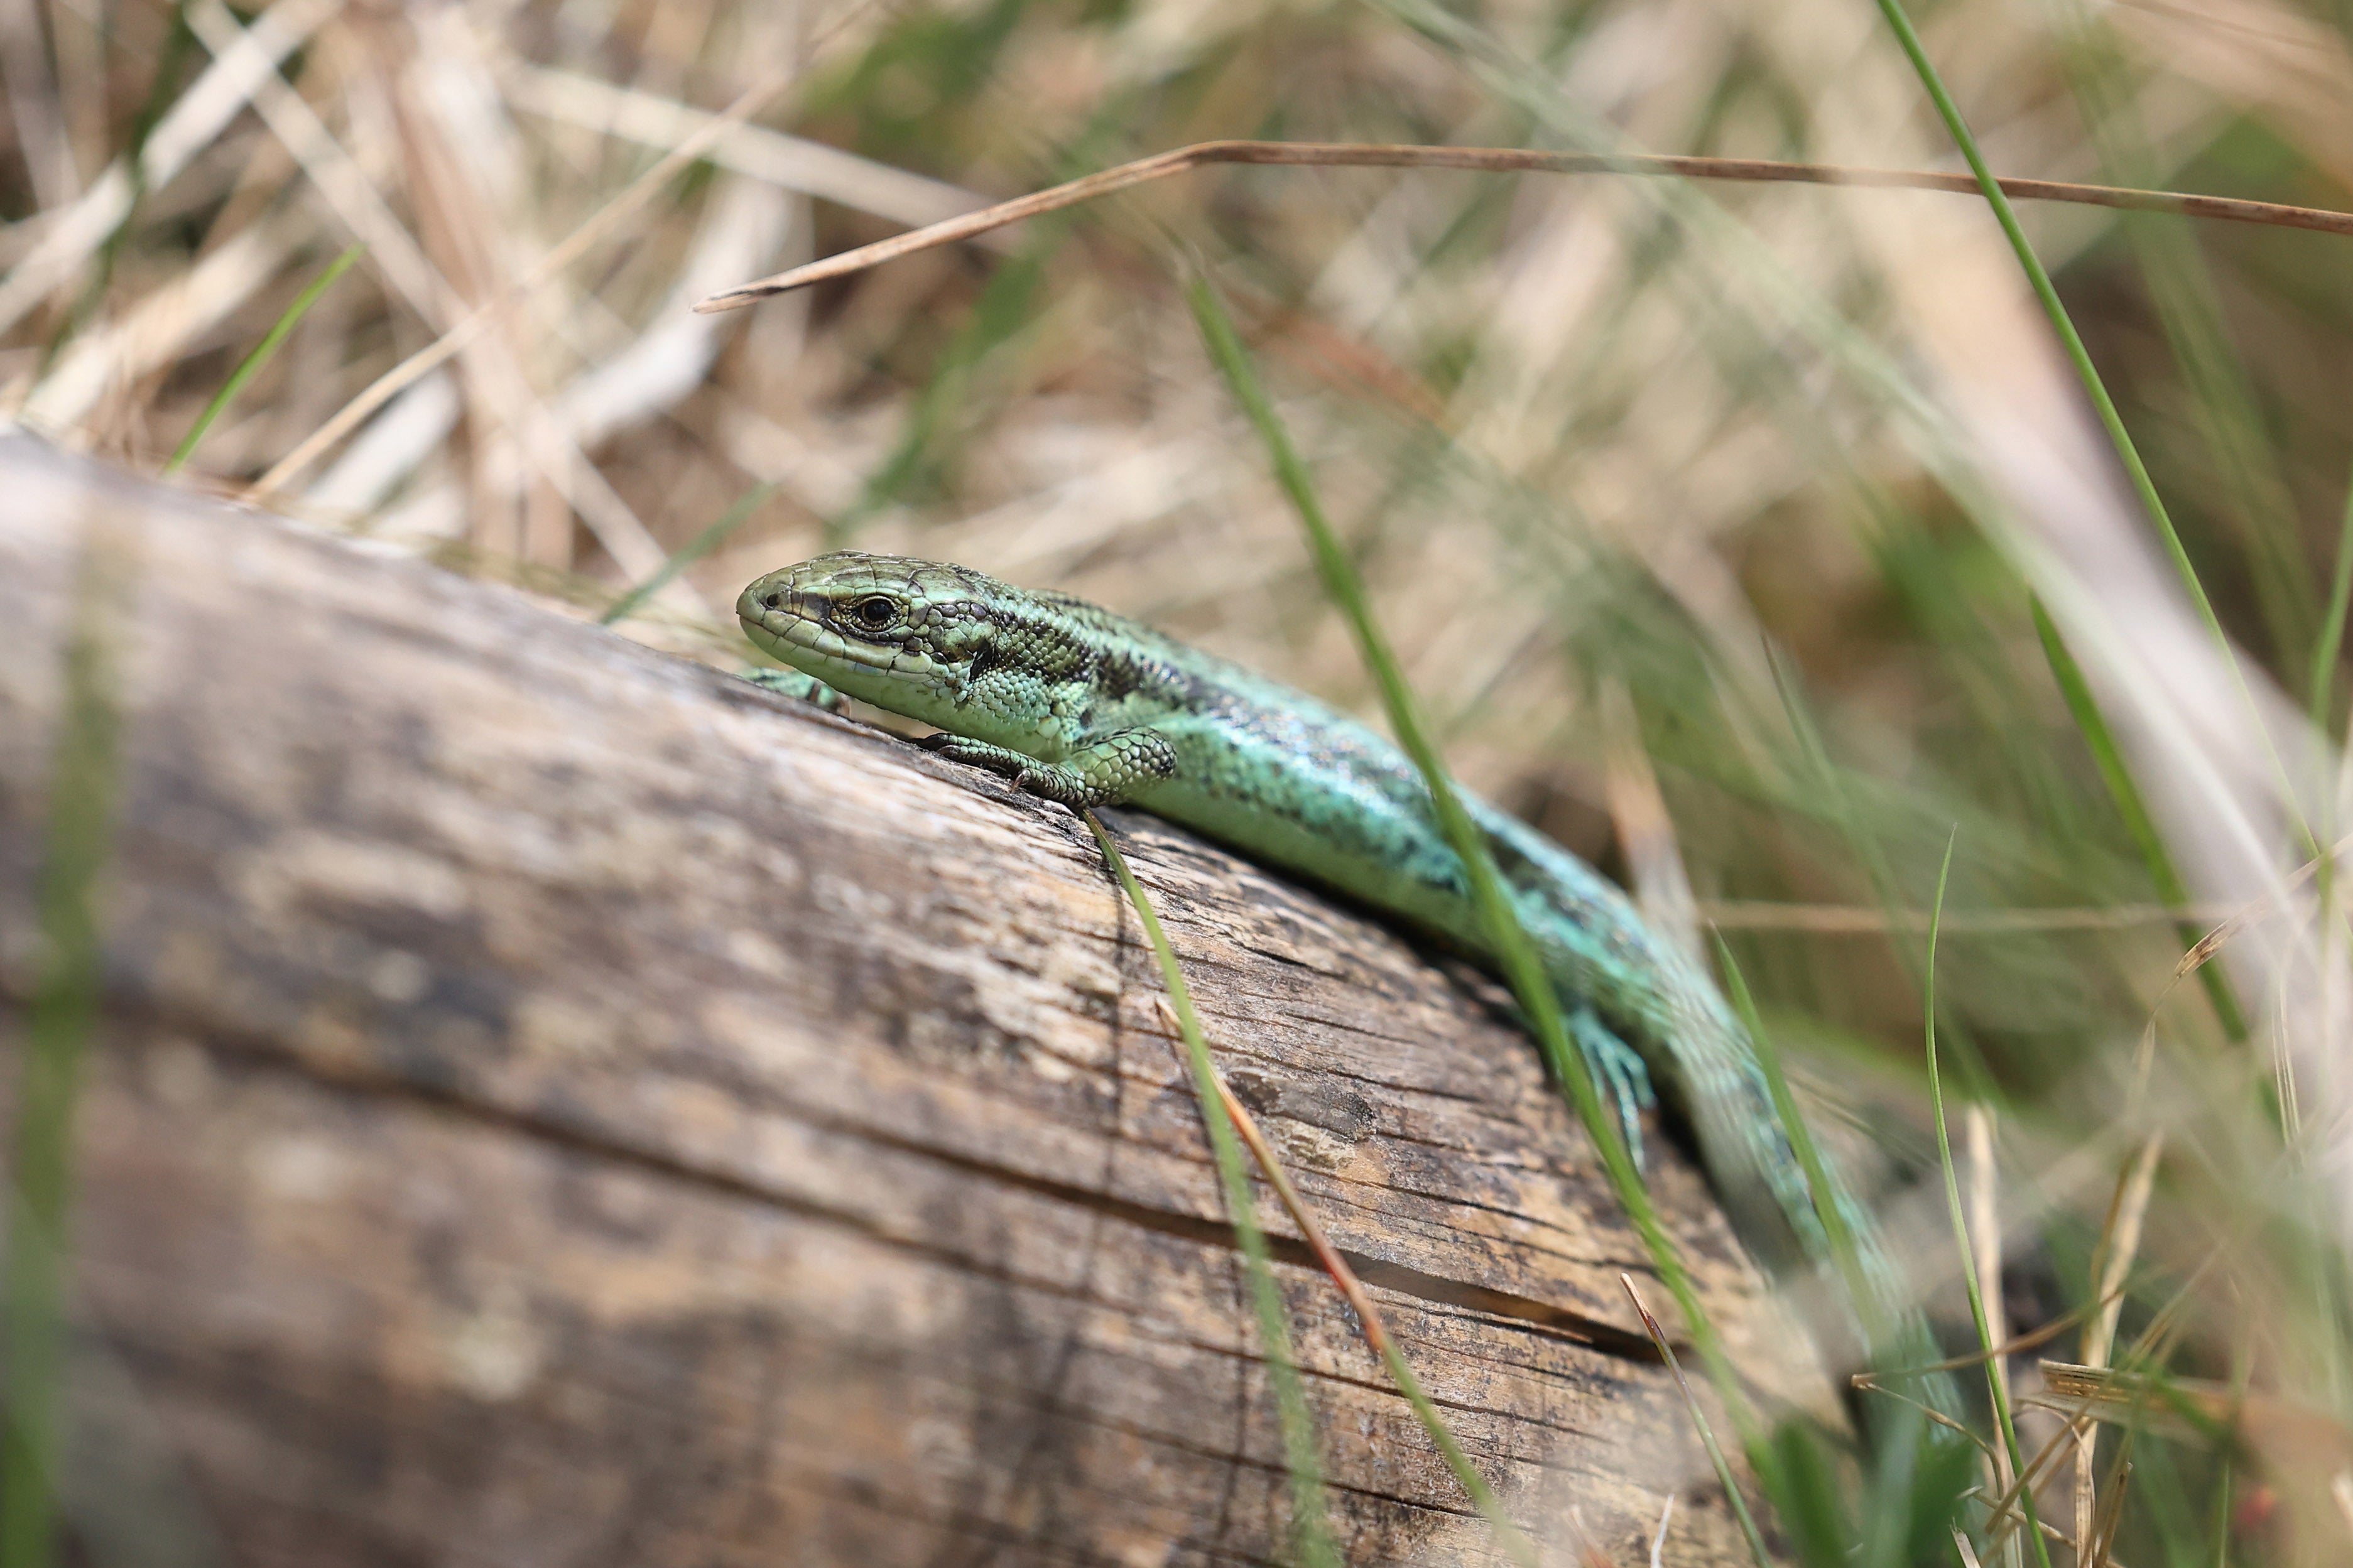 The common lizard in the south of France is being hit hard by the heat